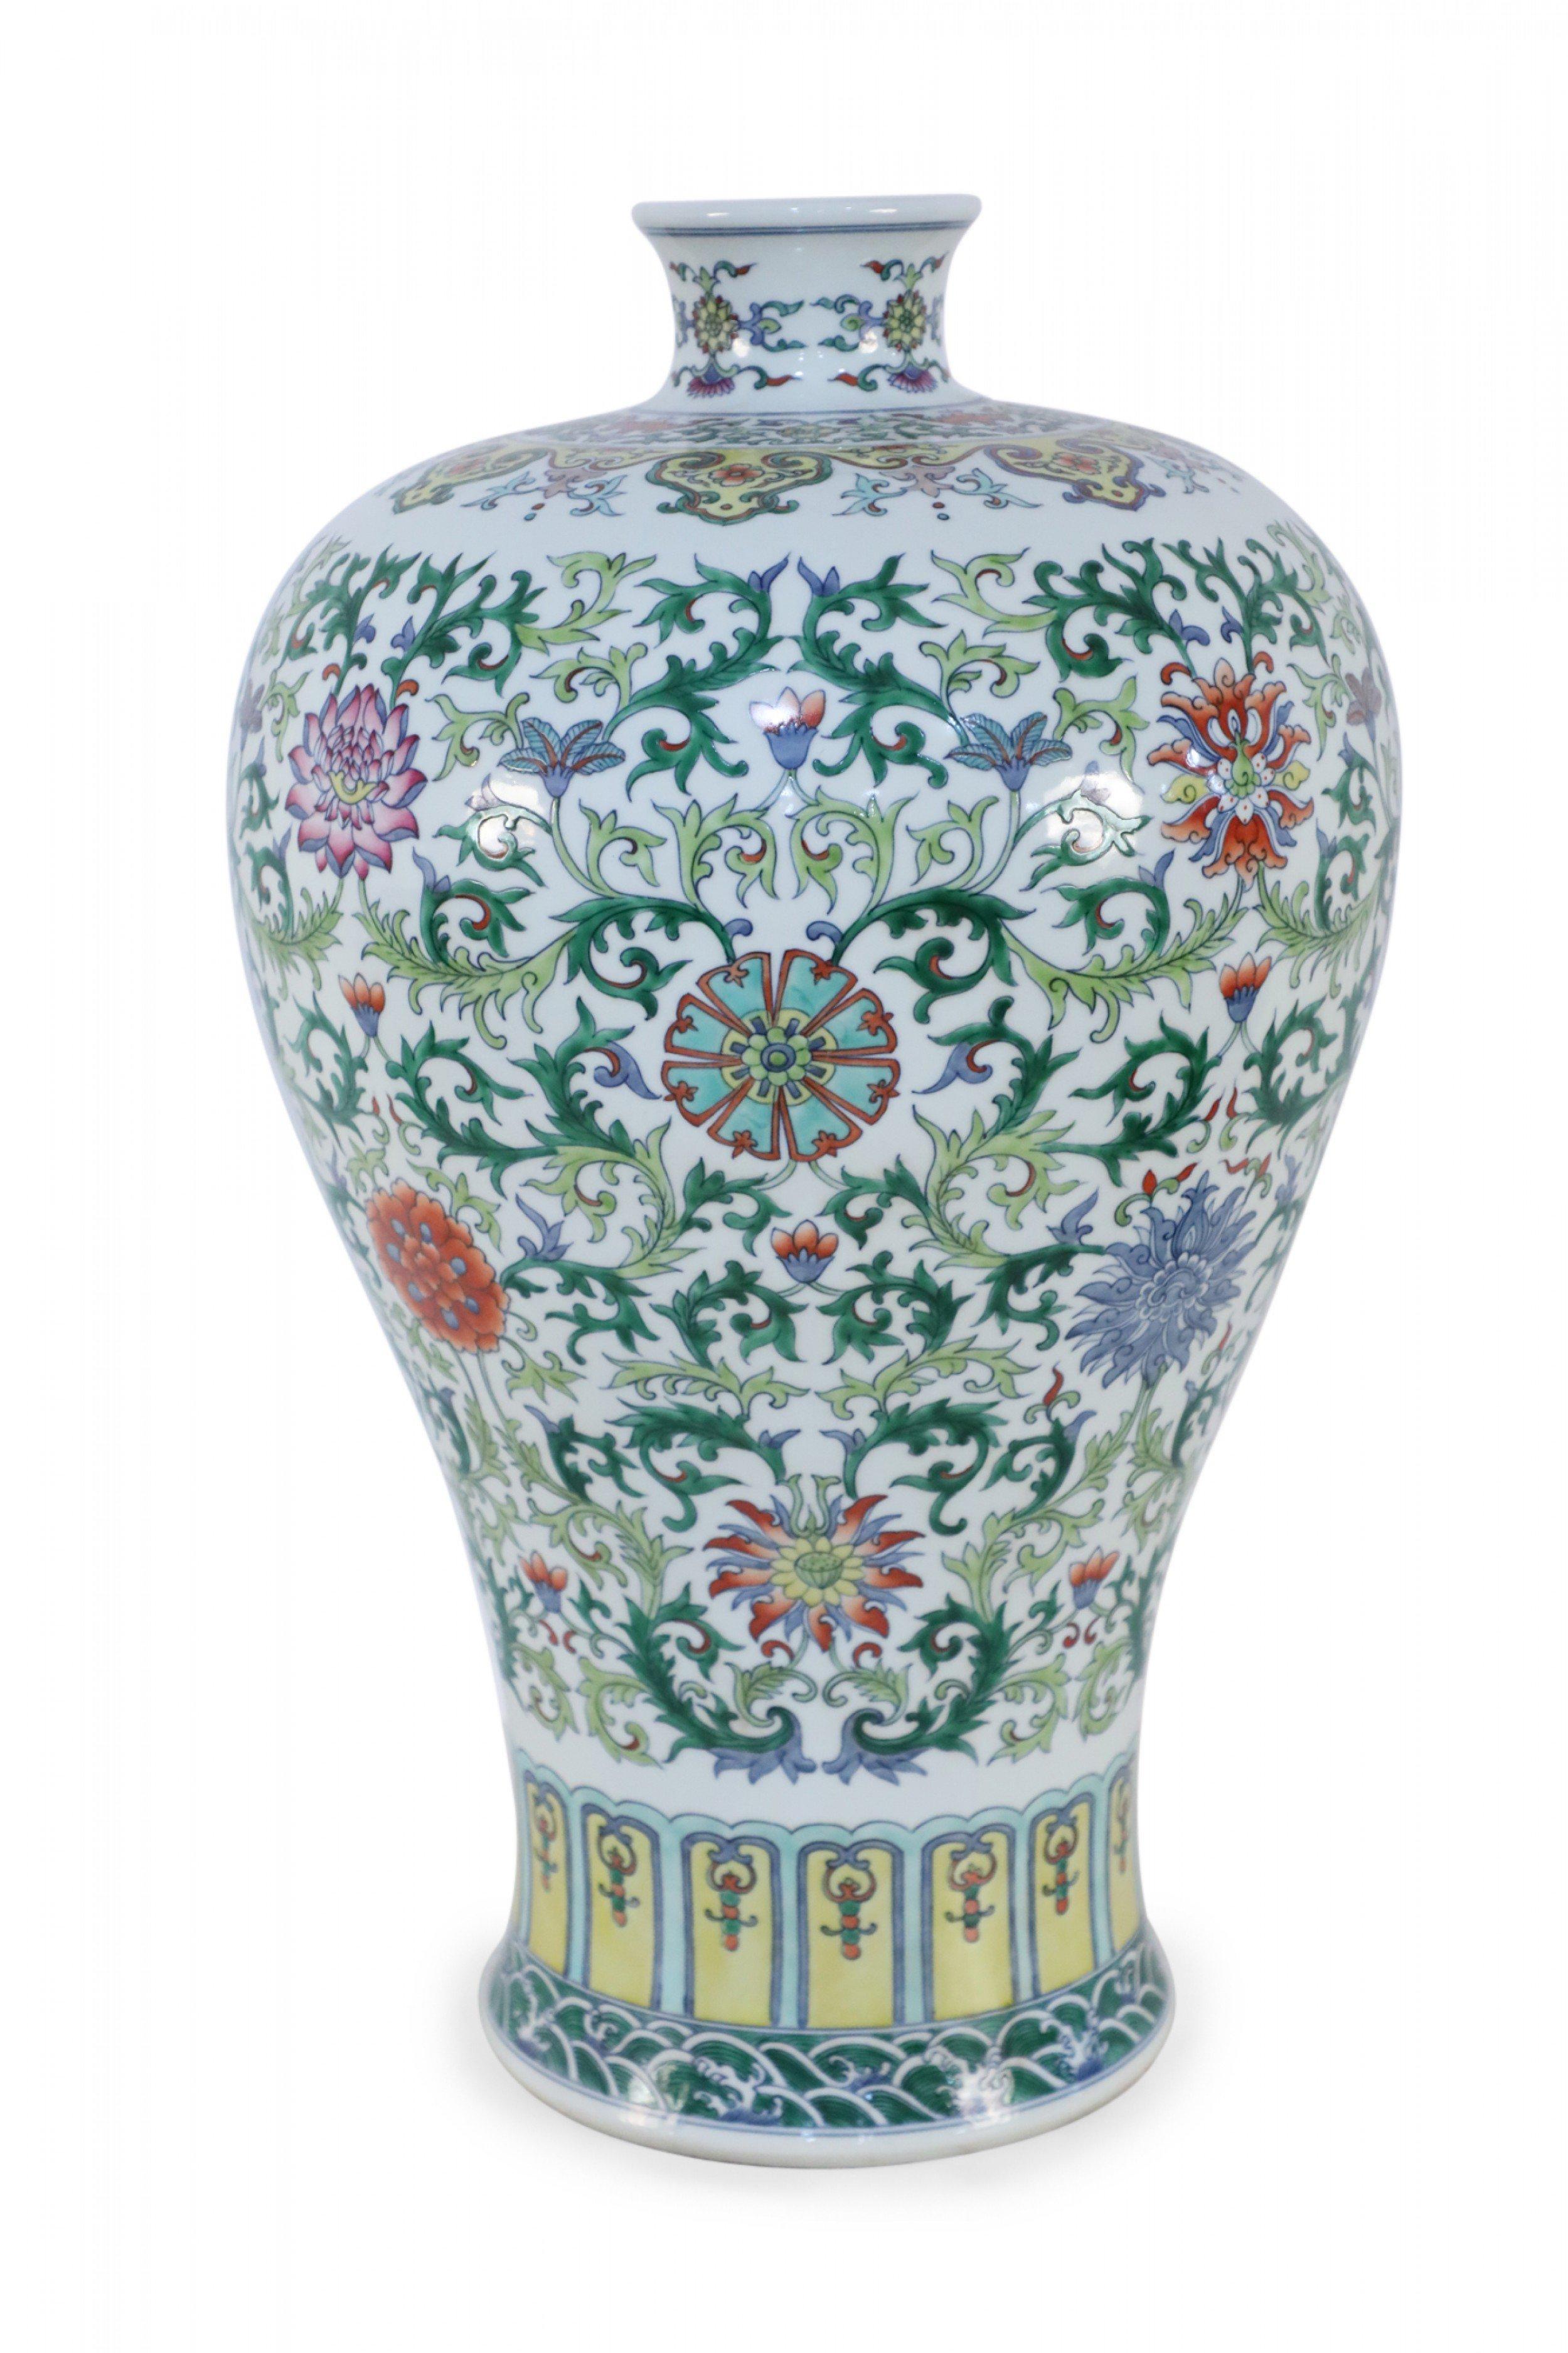 Chinese Export Chinese White and Multicolor Floral and Vine Motif Meiping Porcelain Urn